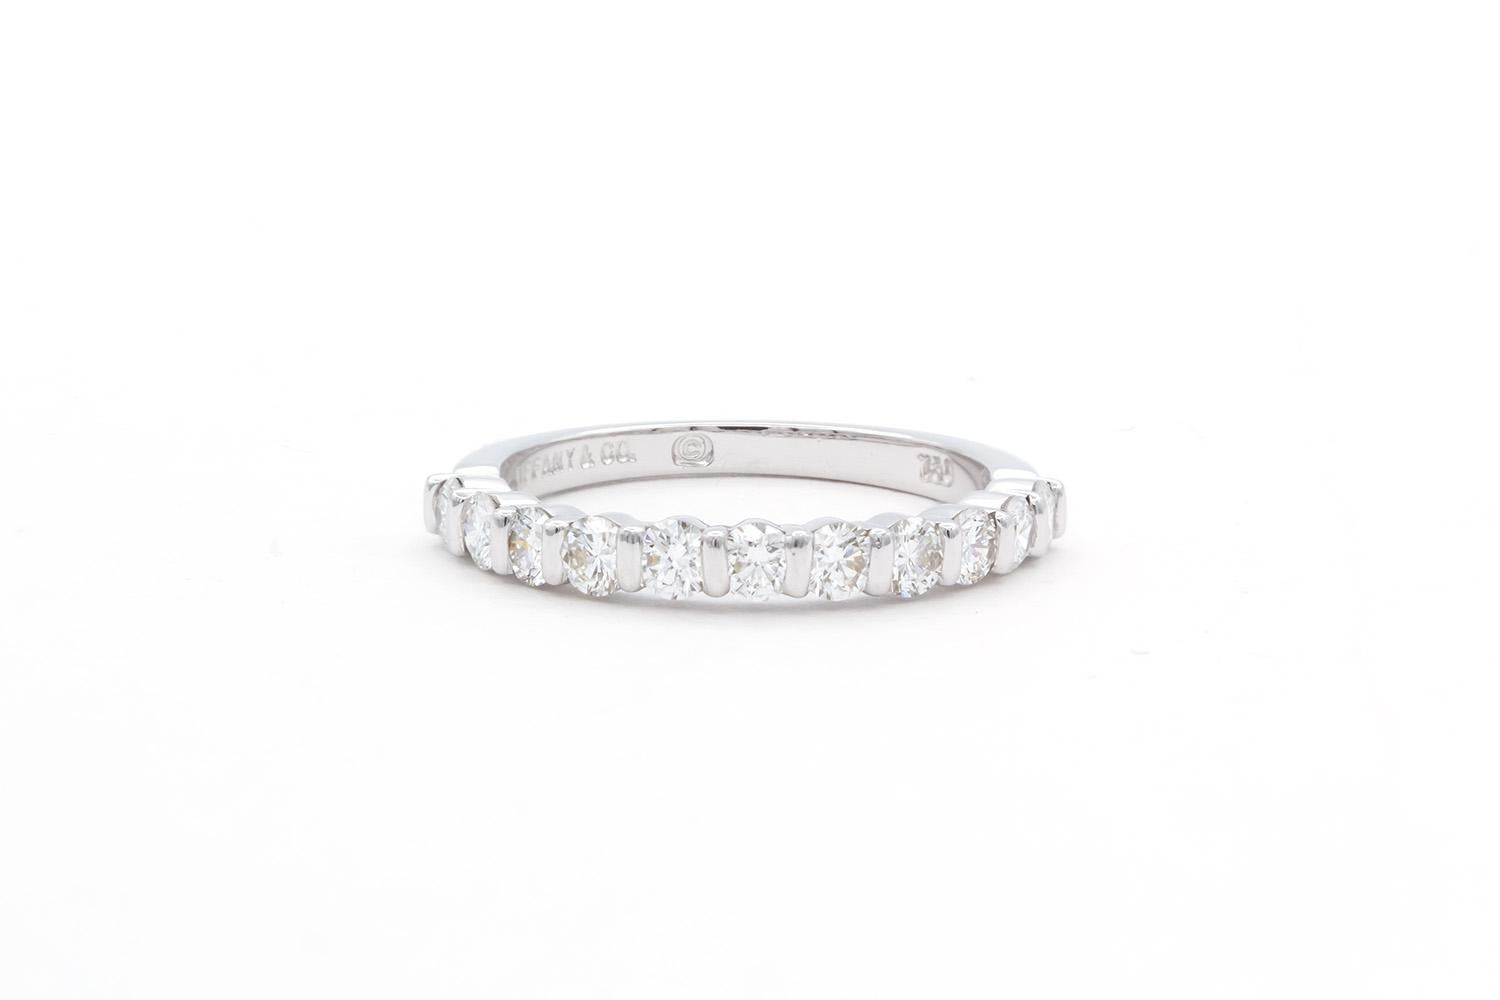 We are pleased to offer this Authentic Tiffany & Co. 18k White Gold & Diamond Tiffany Diamond Wedding Band. It features 0.77ctw F-G/VS1-VS2 Round brilliant Cut Diamonds channel set in 18k white gold extending half way around the ring. It is a size 6